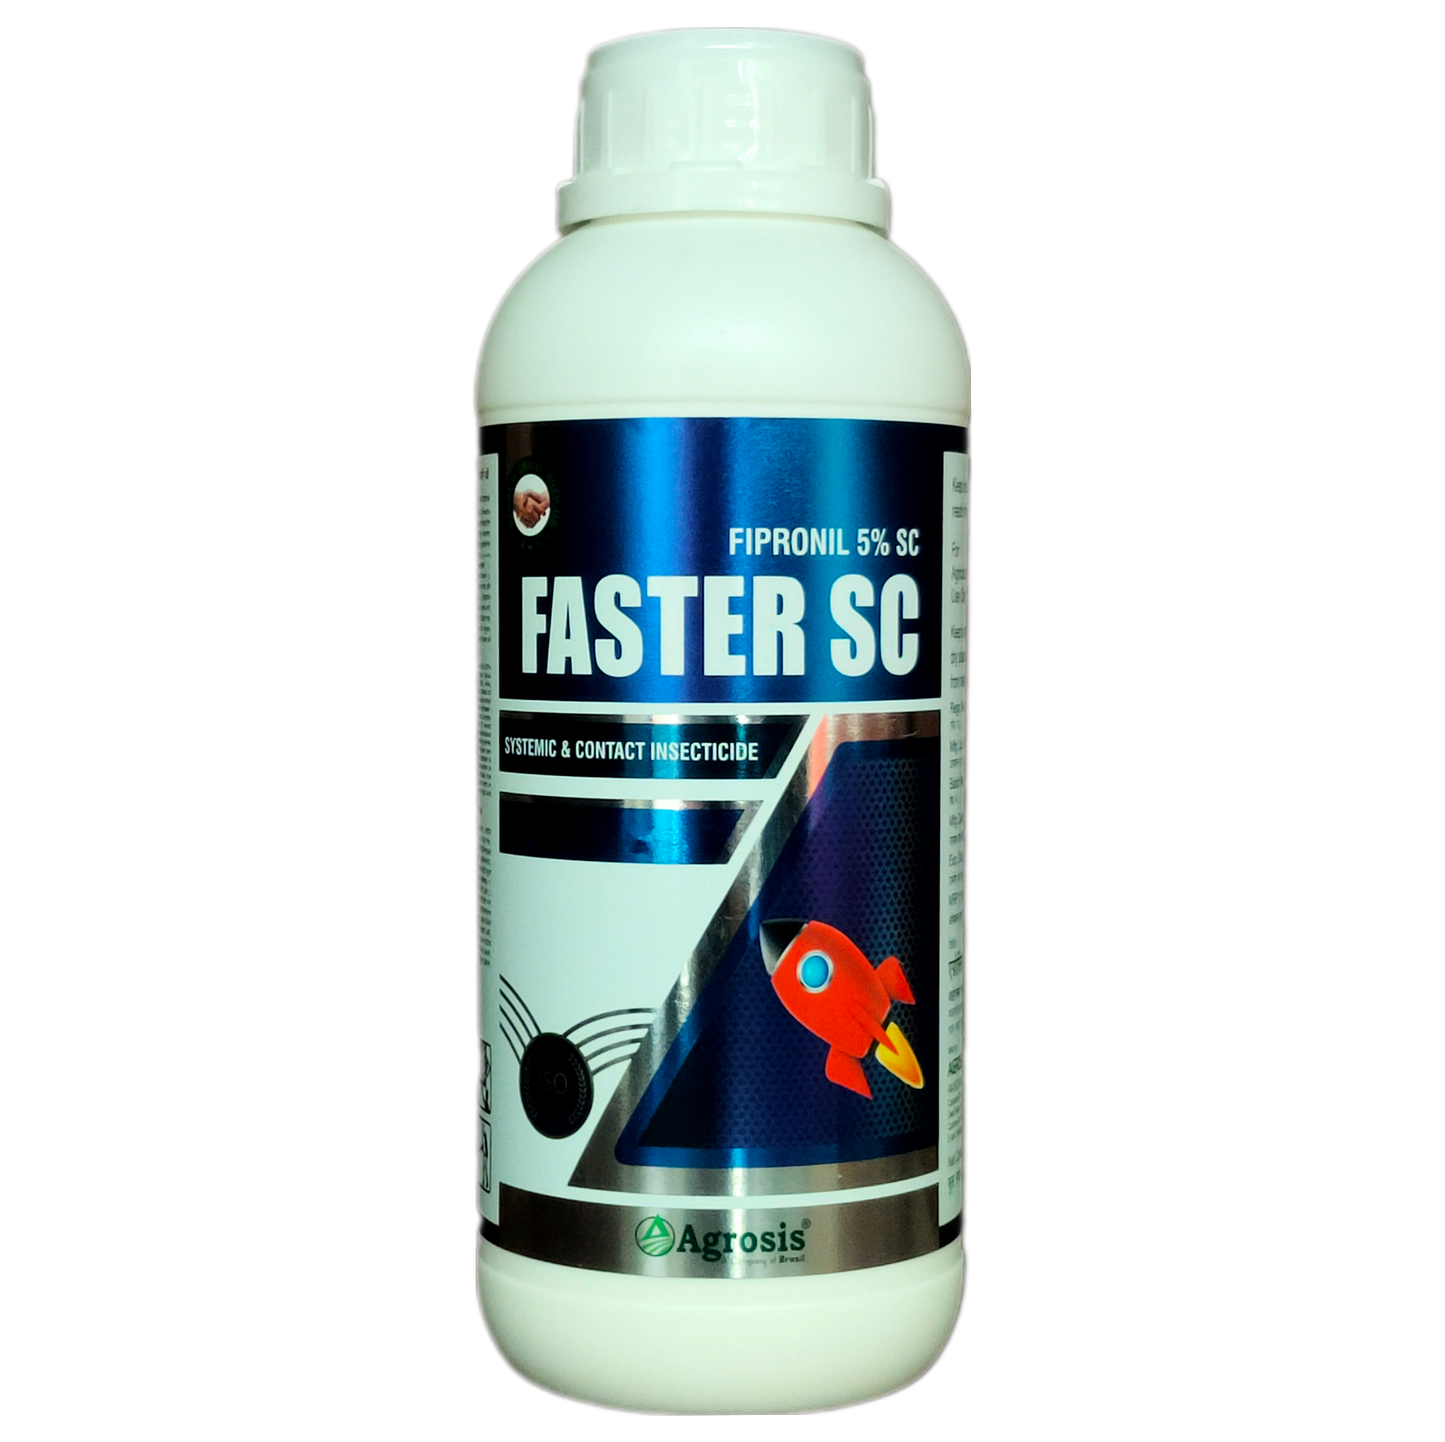 Faster SC - Fipronil 5% SC Insecticide